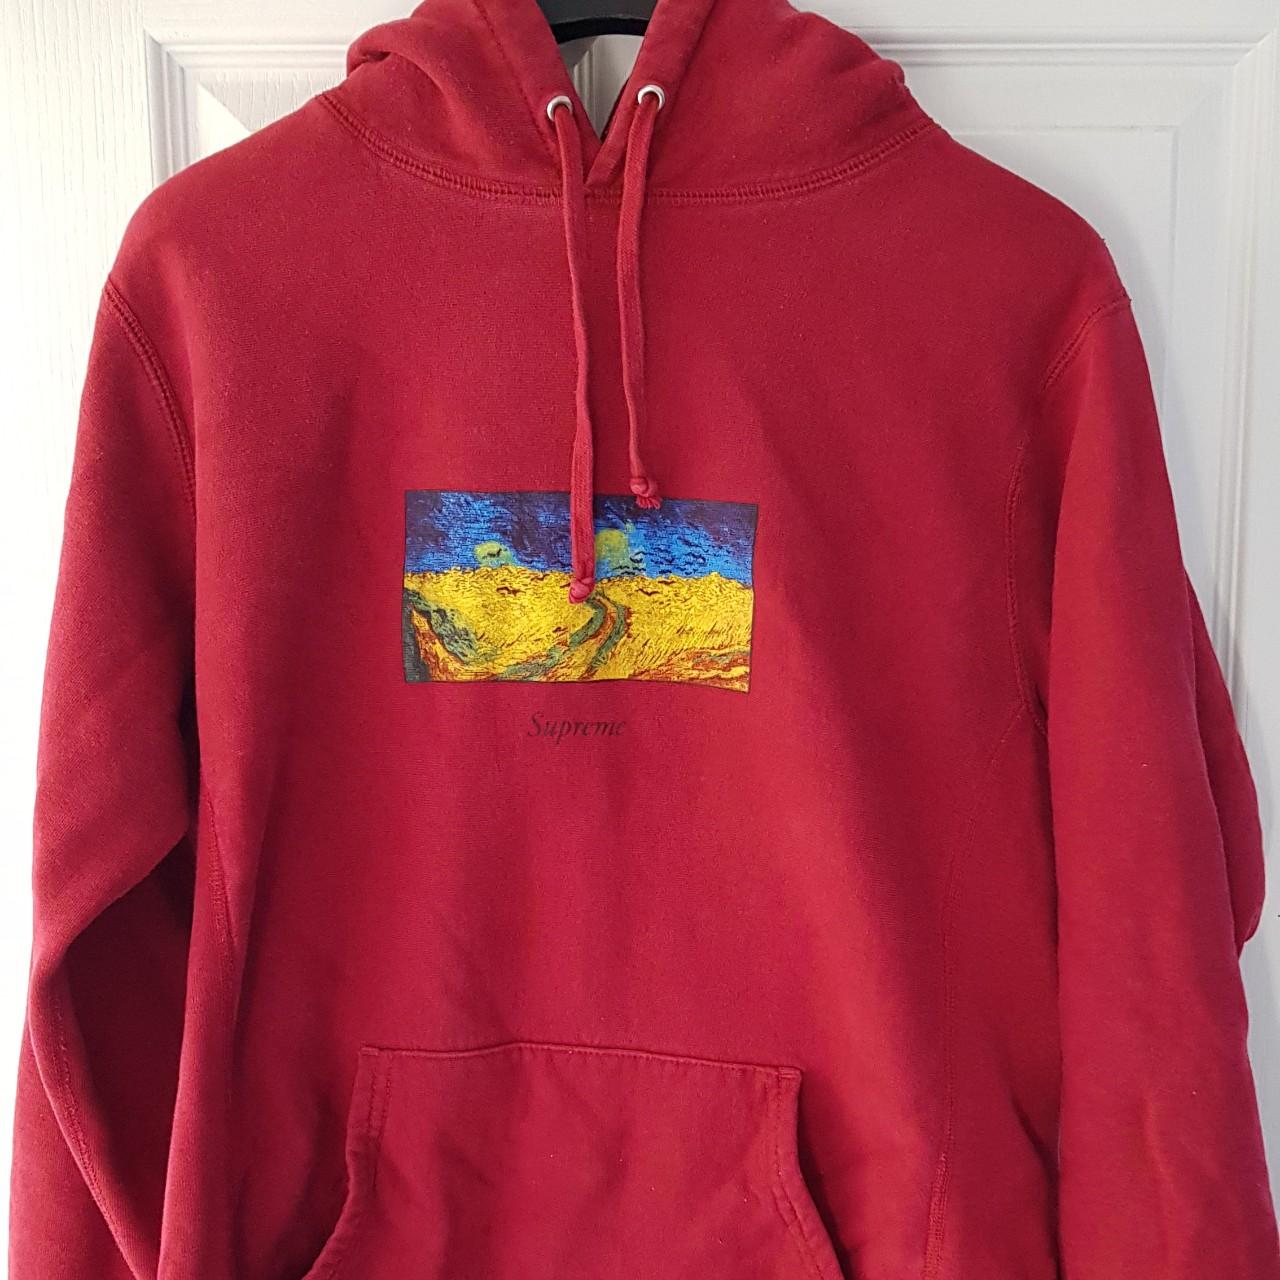 Supreme field hoodie in red, 7/10 condition, slight...